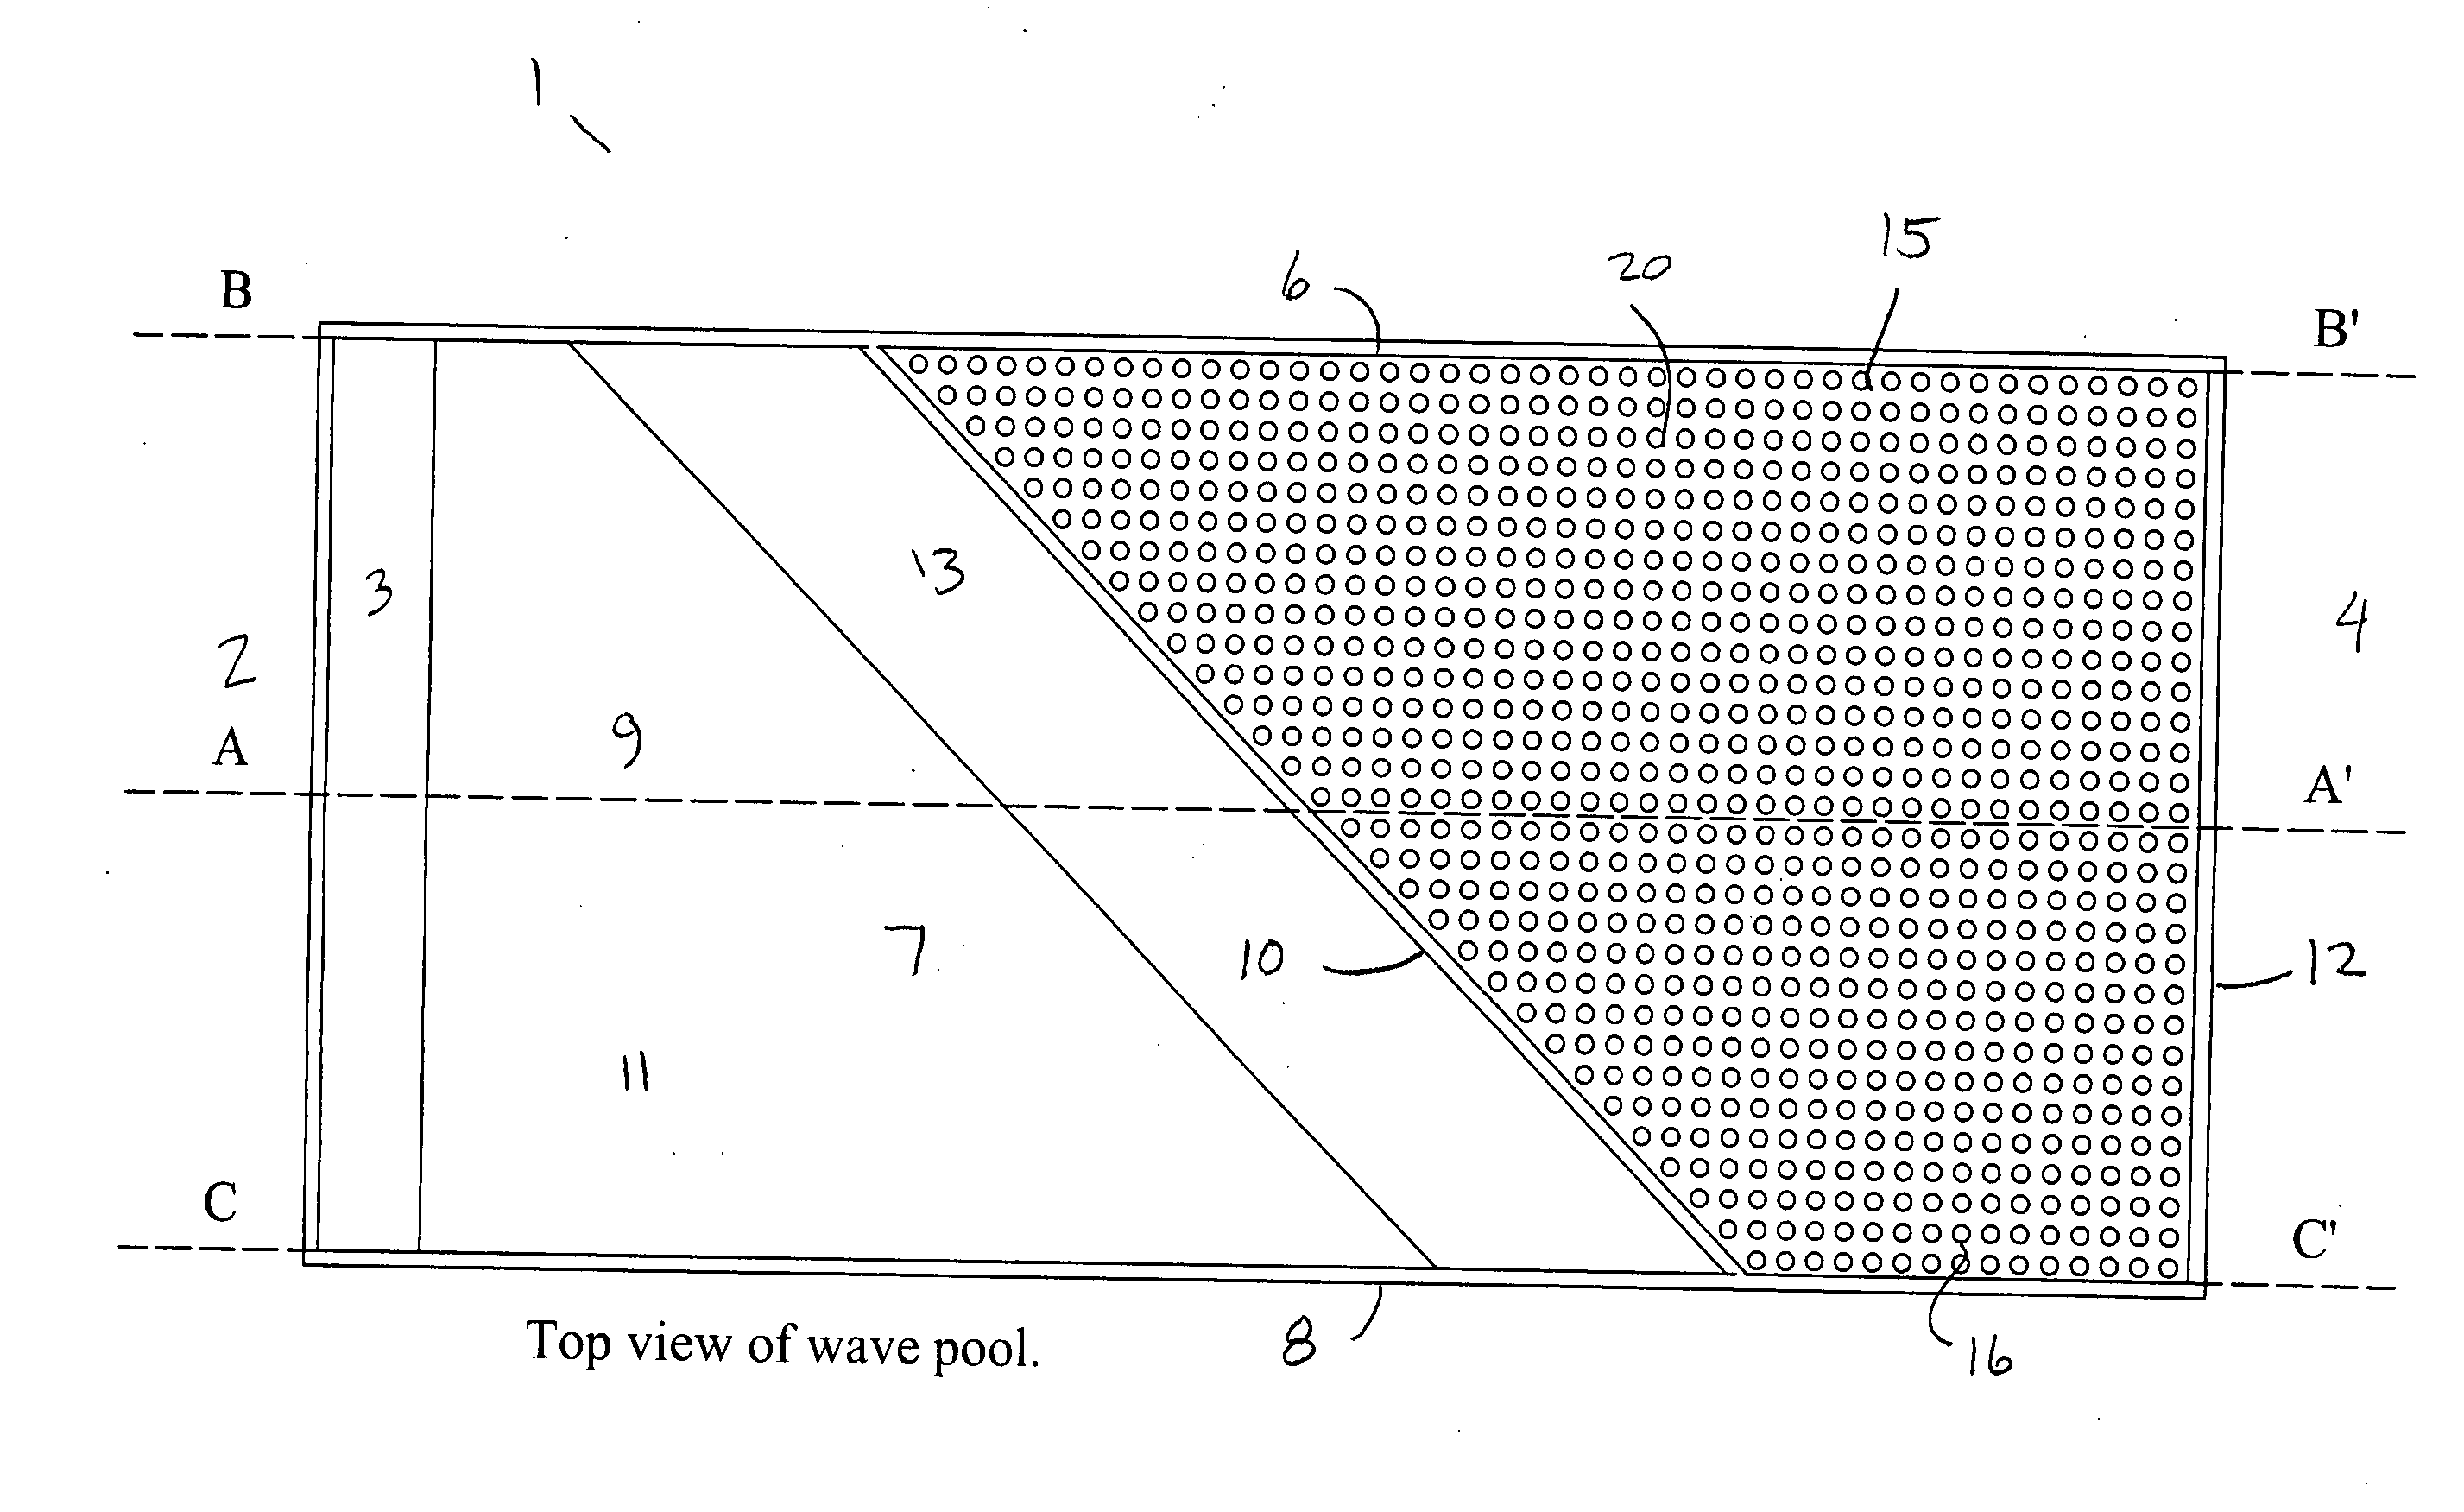 Method and apparatus for dampenning waves in a wave pool